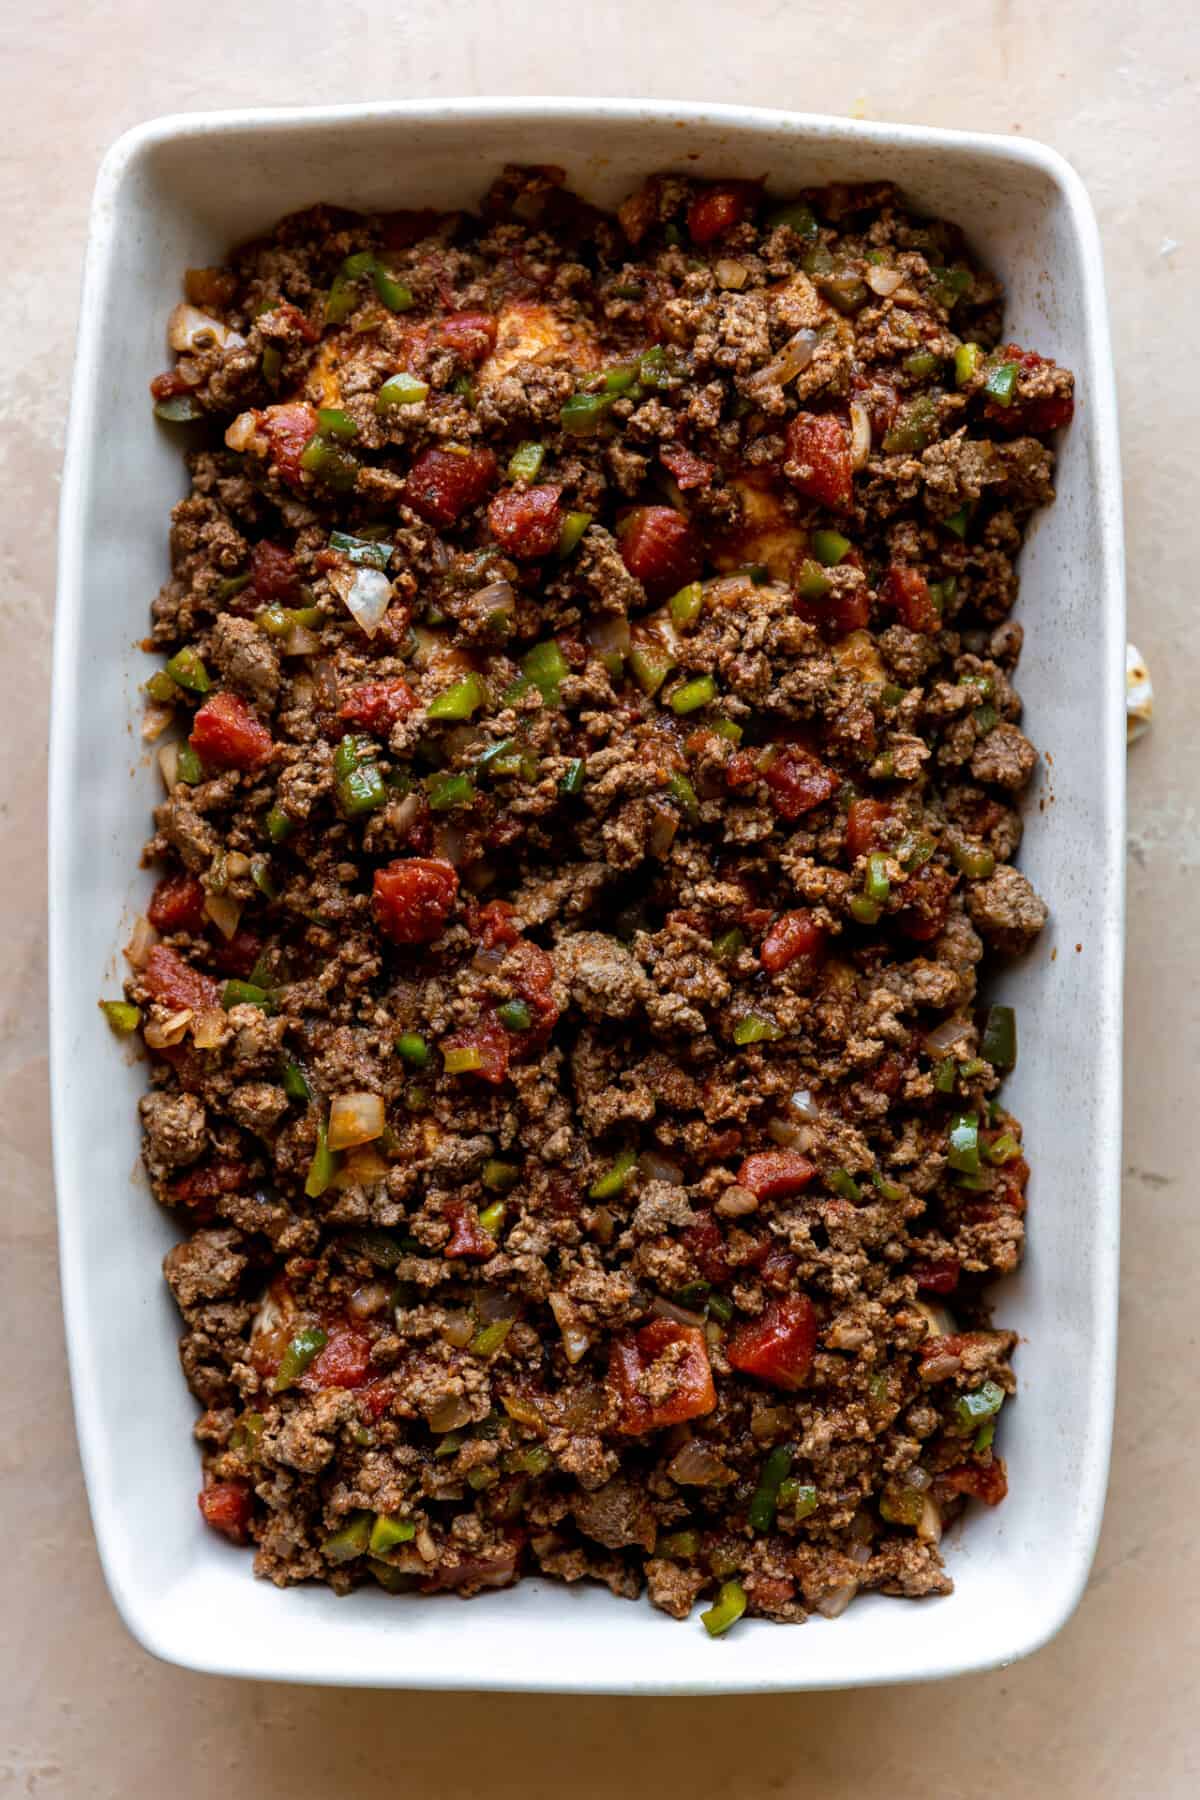 Ground beef mixture on top of baked biscuits in a baking dish to make a casserole.